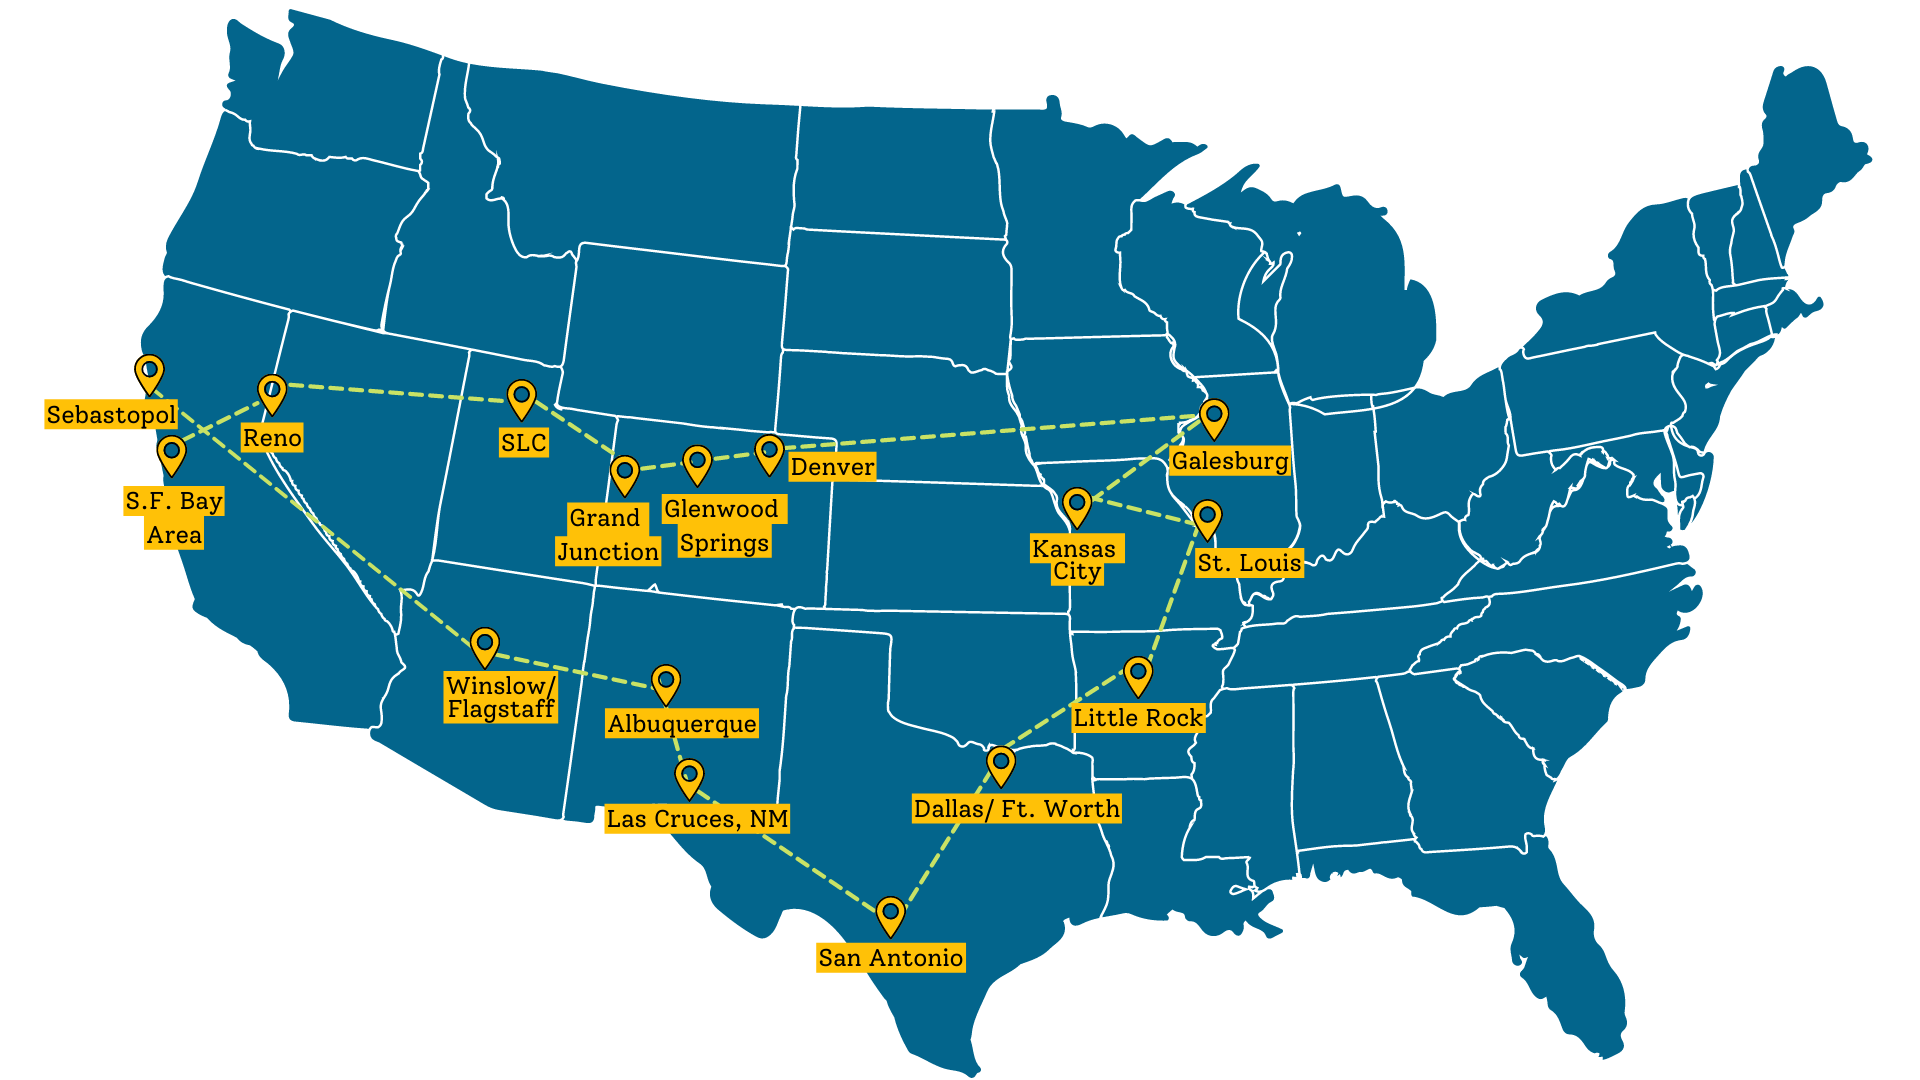 Updated Whistle Stop Book Tour Map